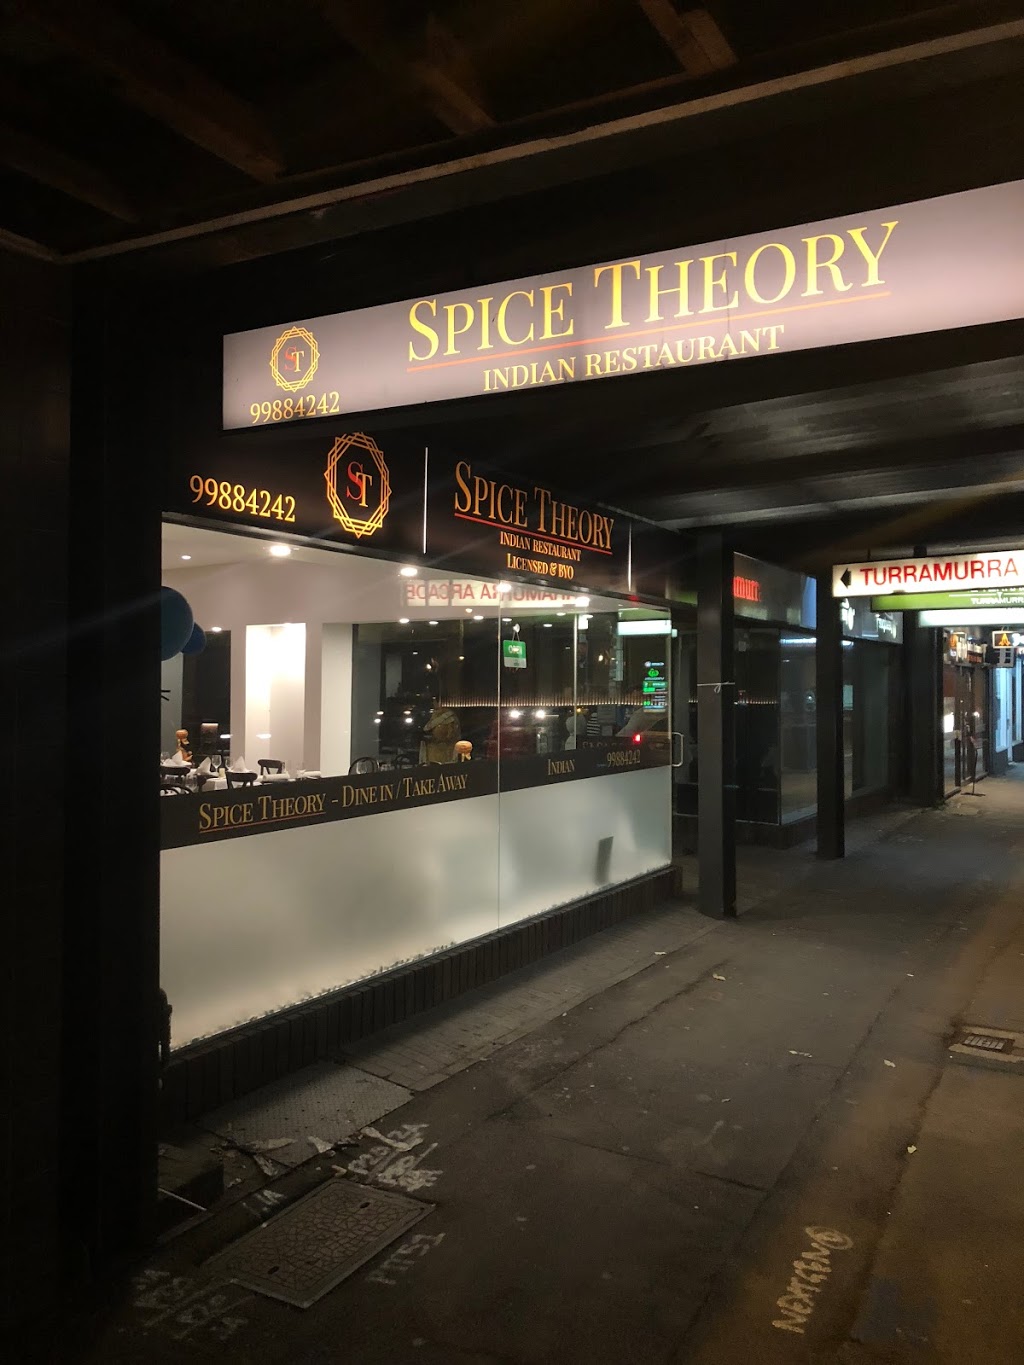 Spice Theory Indian Restaurant | meal delivery | 1259 Pacific Hwy, Turramurra NSW 2074, Australia | 0299884242 OR +61 2 9988 4242